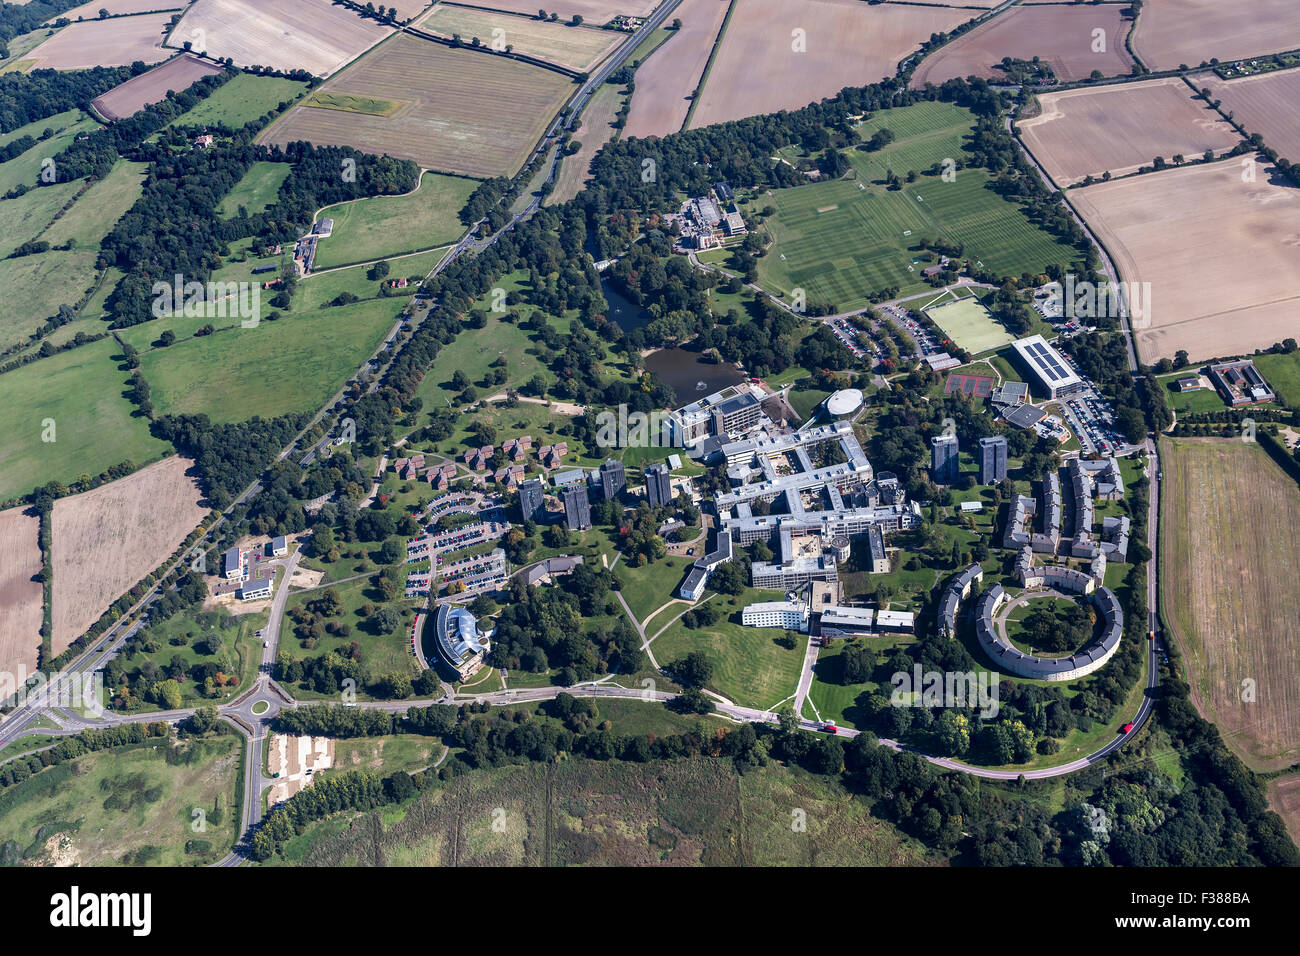 AERIAL VIEWS OF THE UNIVERSITY OF ESSEX, WIVENHOE SHOWING THE WHOLE OF THE UNIVERSITY AREA Stock Photo